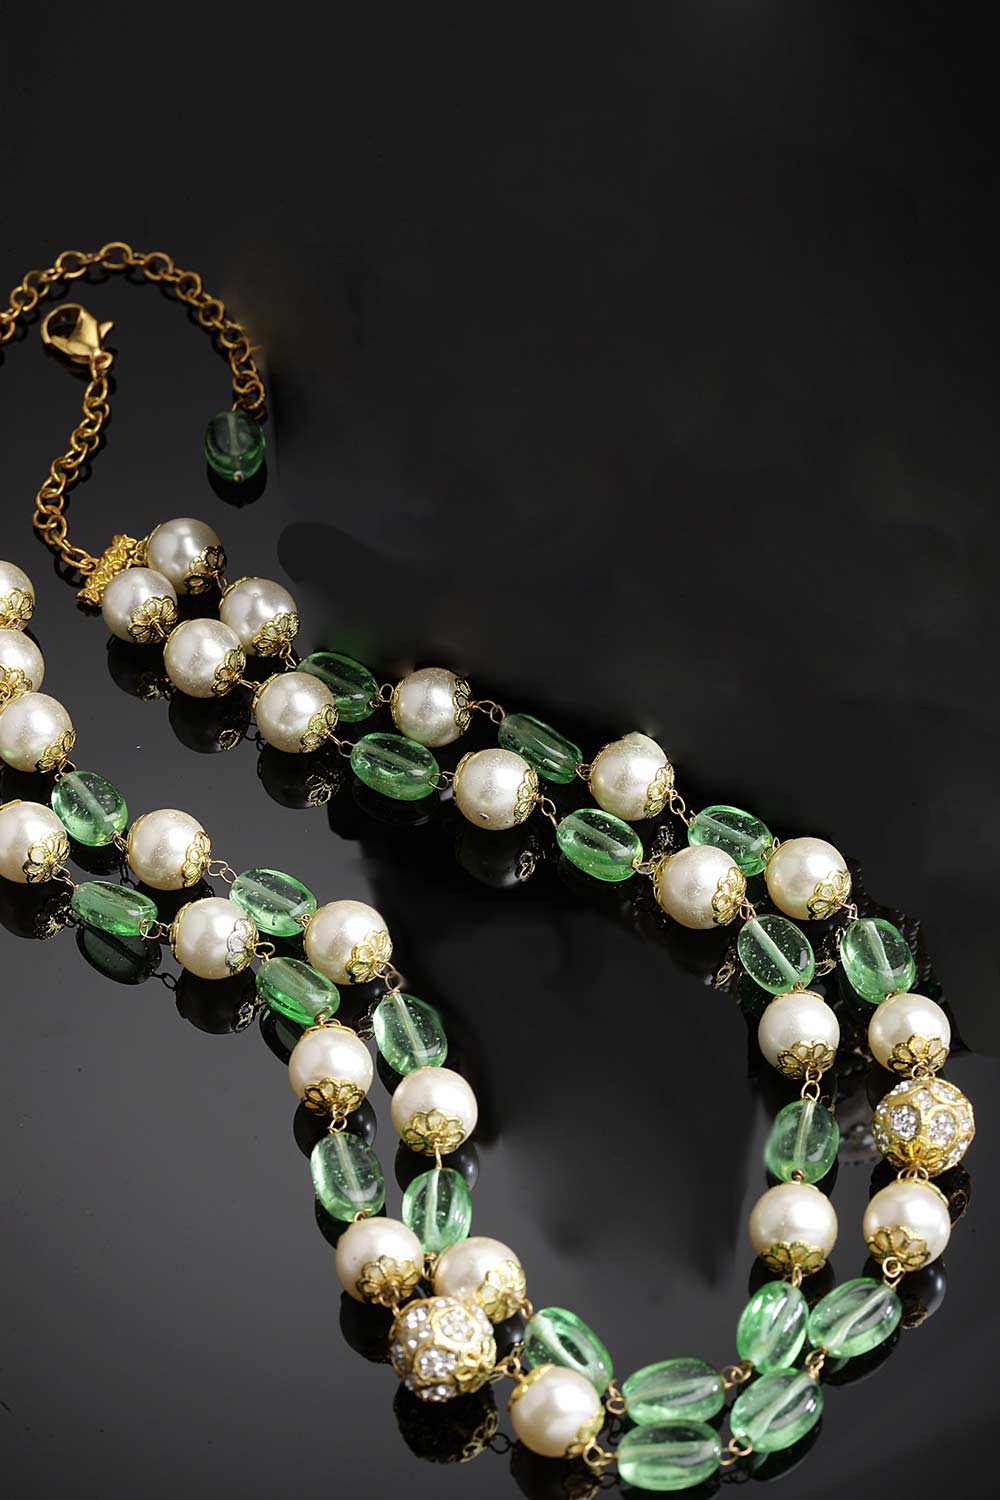 Green And Gold Gold-Plated American Diamonds And Pearls Bead Necklaces